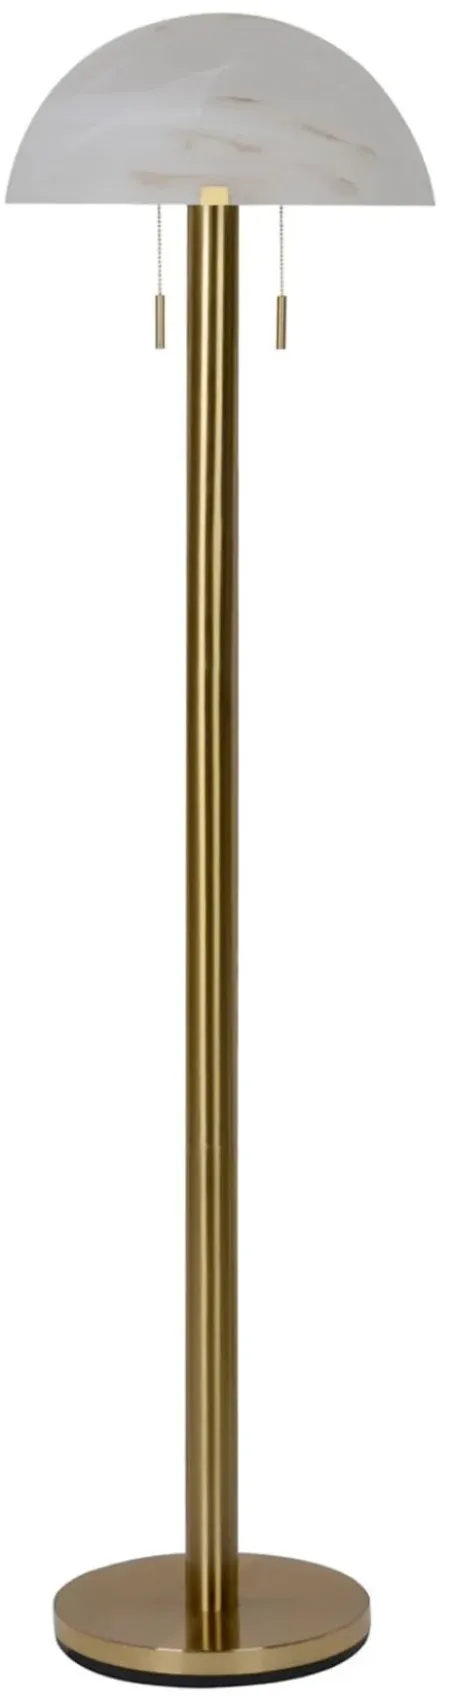 Brass and Glass Shade Floor Lamp 61.5"H